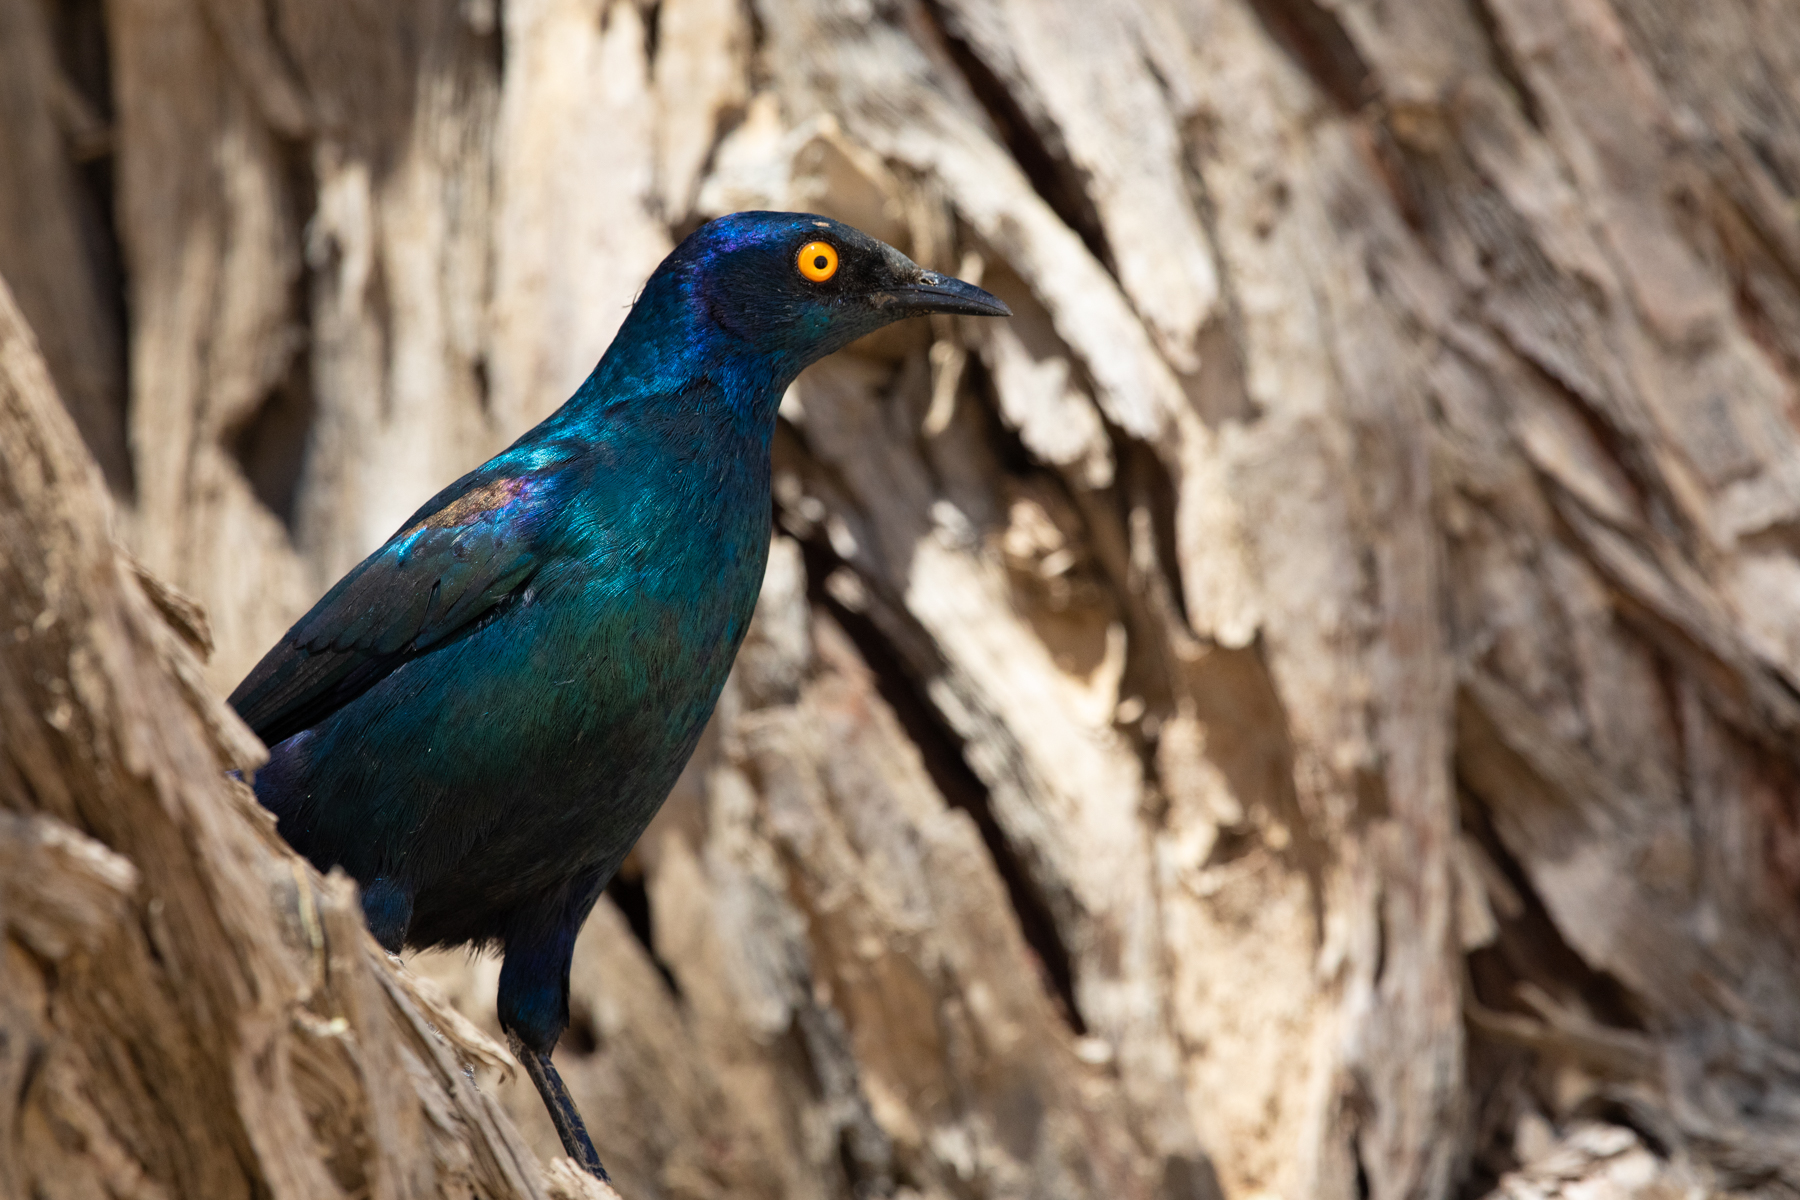 Cape Glossy Starling are beautiful but they love raiding picnic sites!